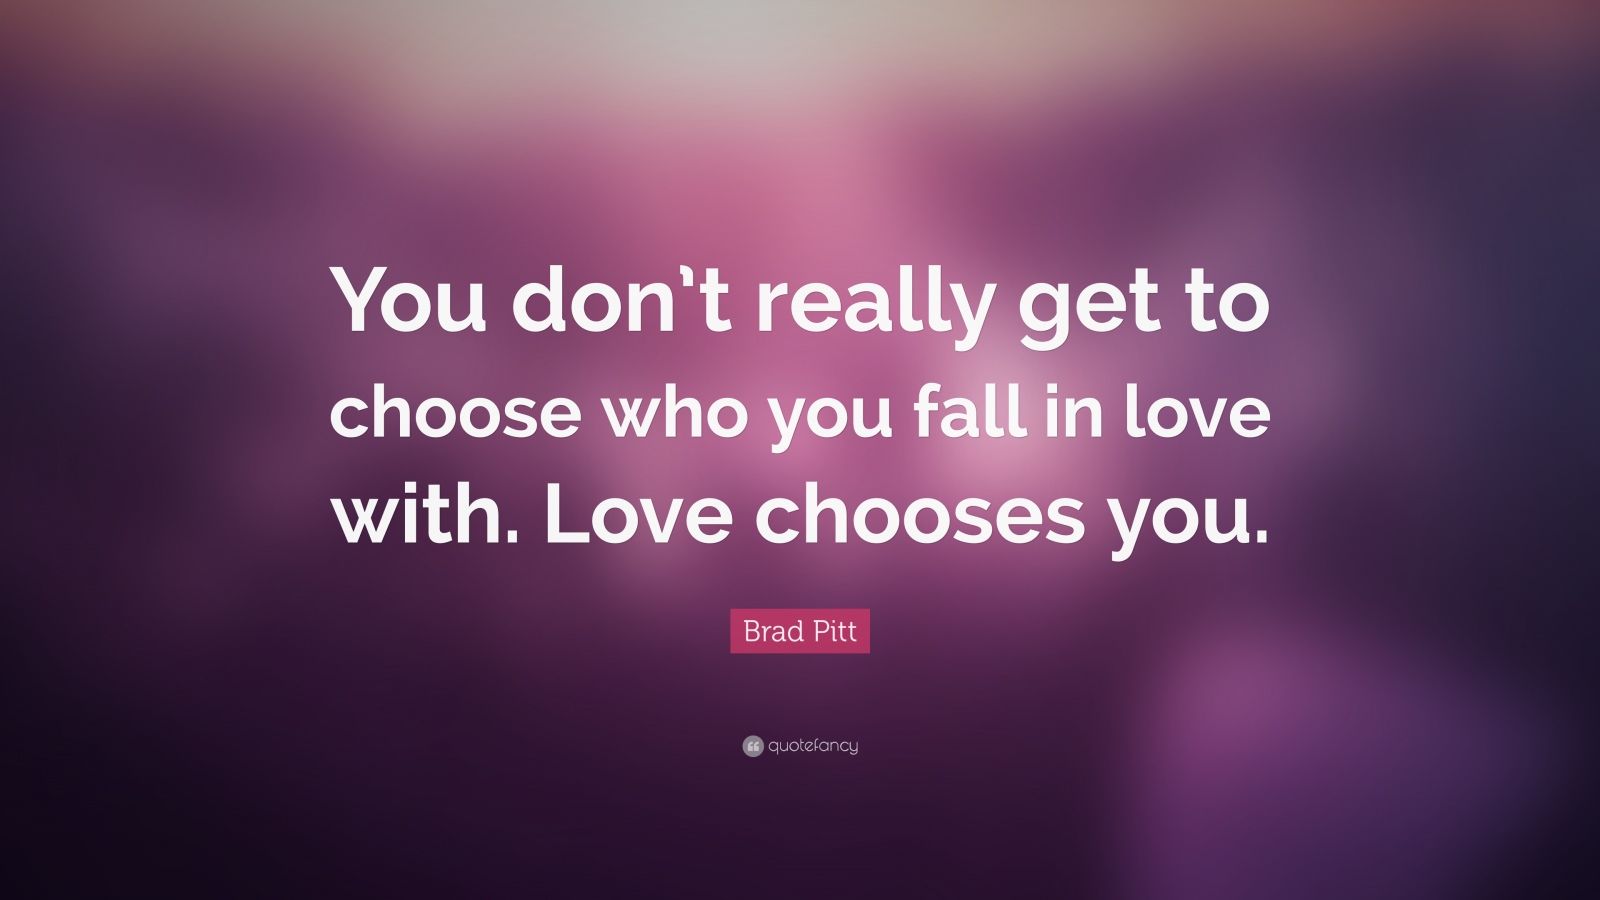 Brad Pitt Quote: “You don’t really get to choose who you fall in love